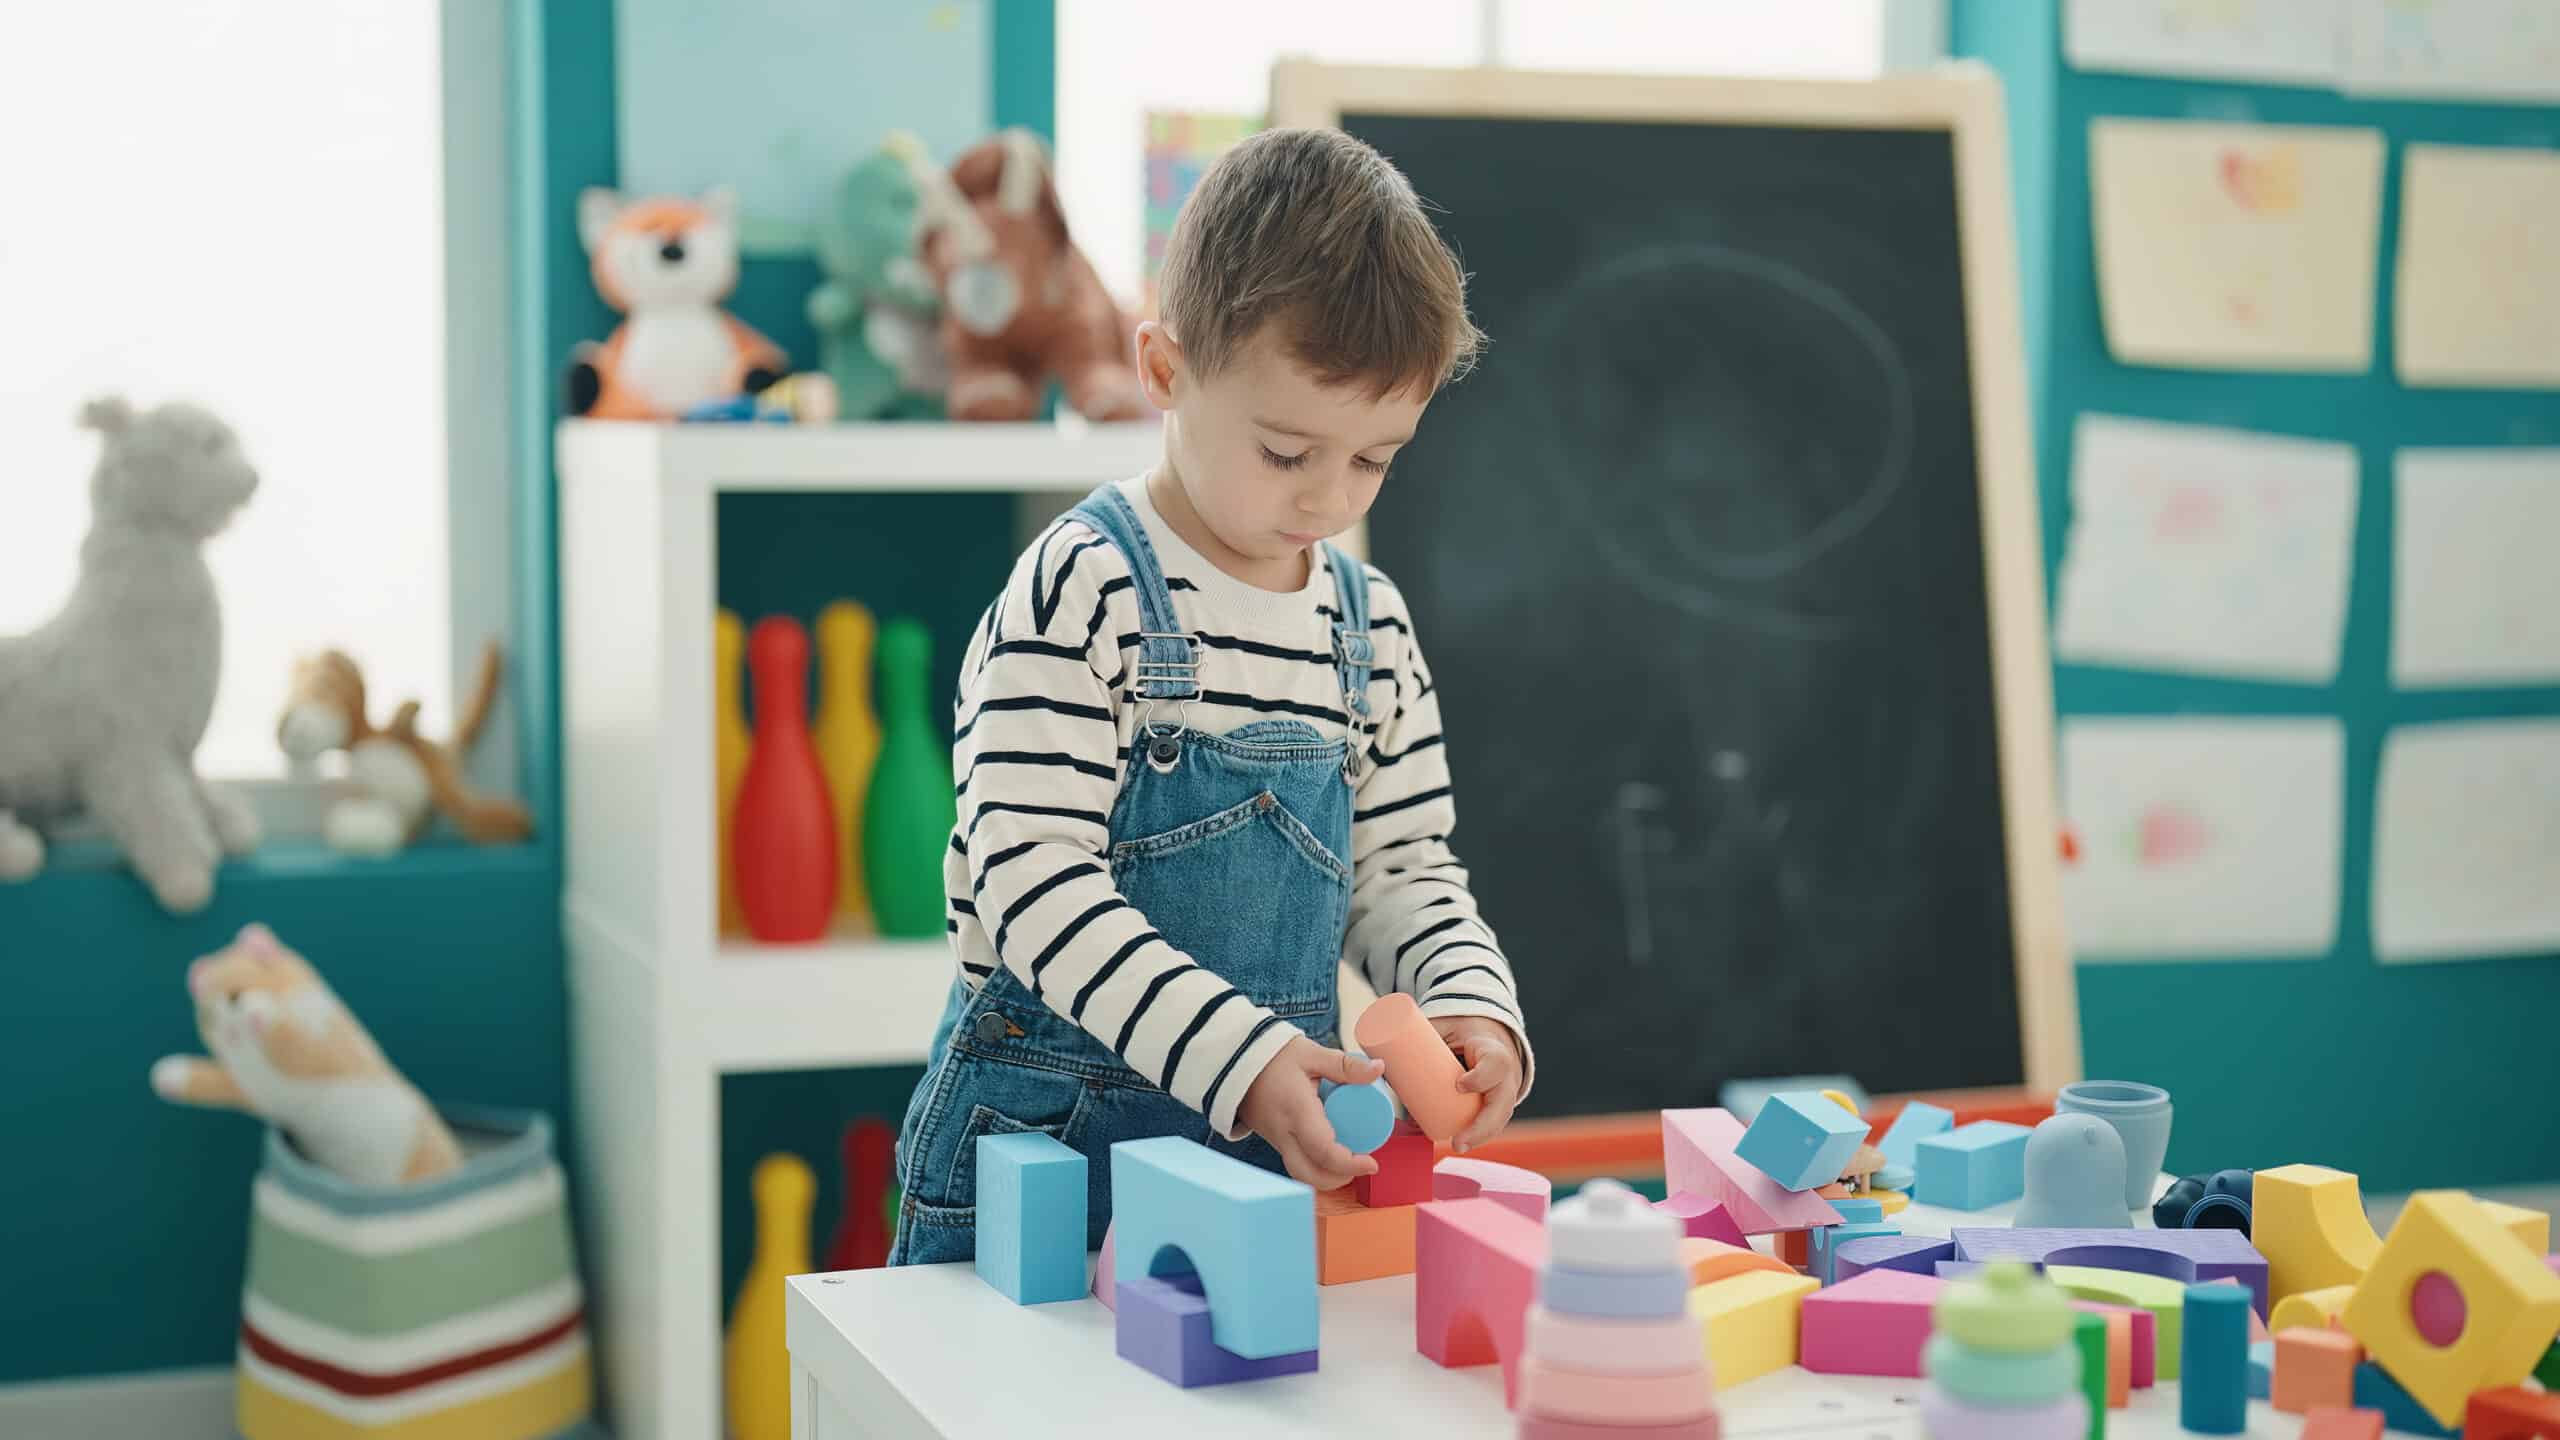 Toddler playing with colorful blocks in a playroom setting with toys and a chalkboard in the background.